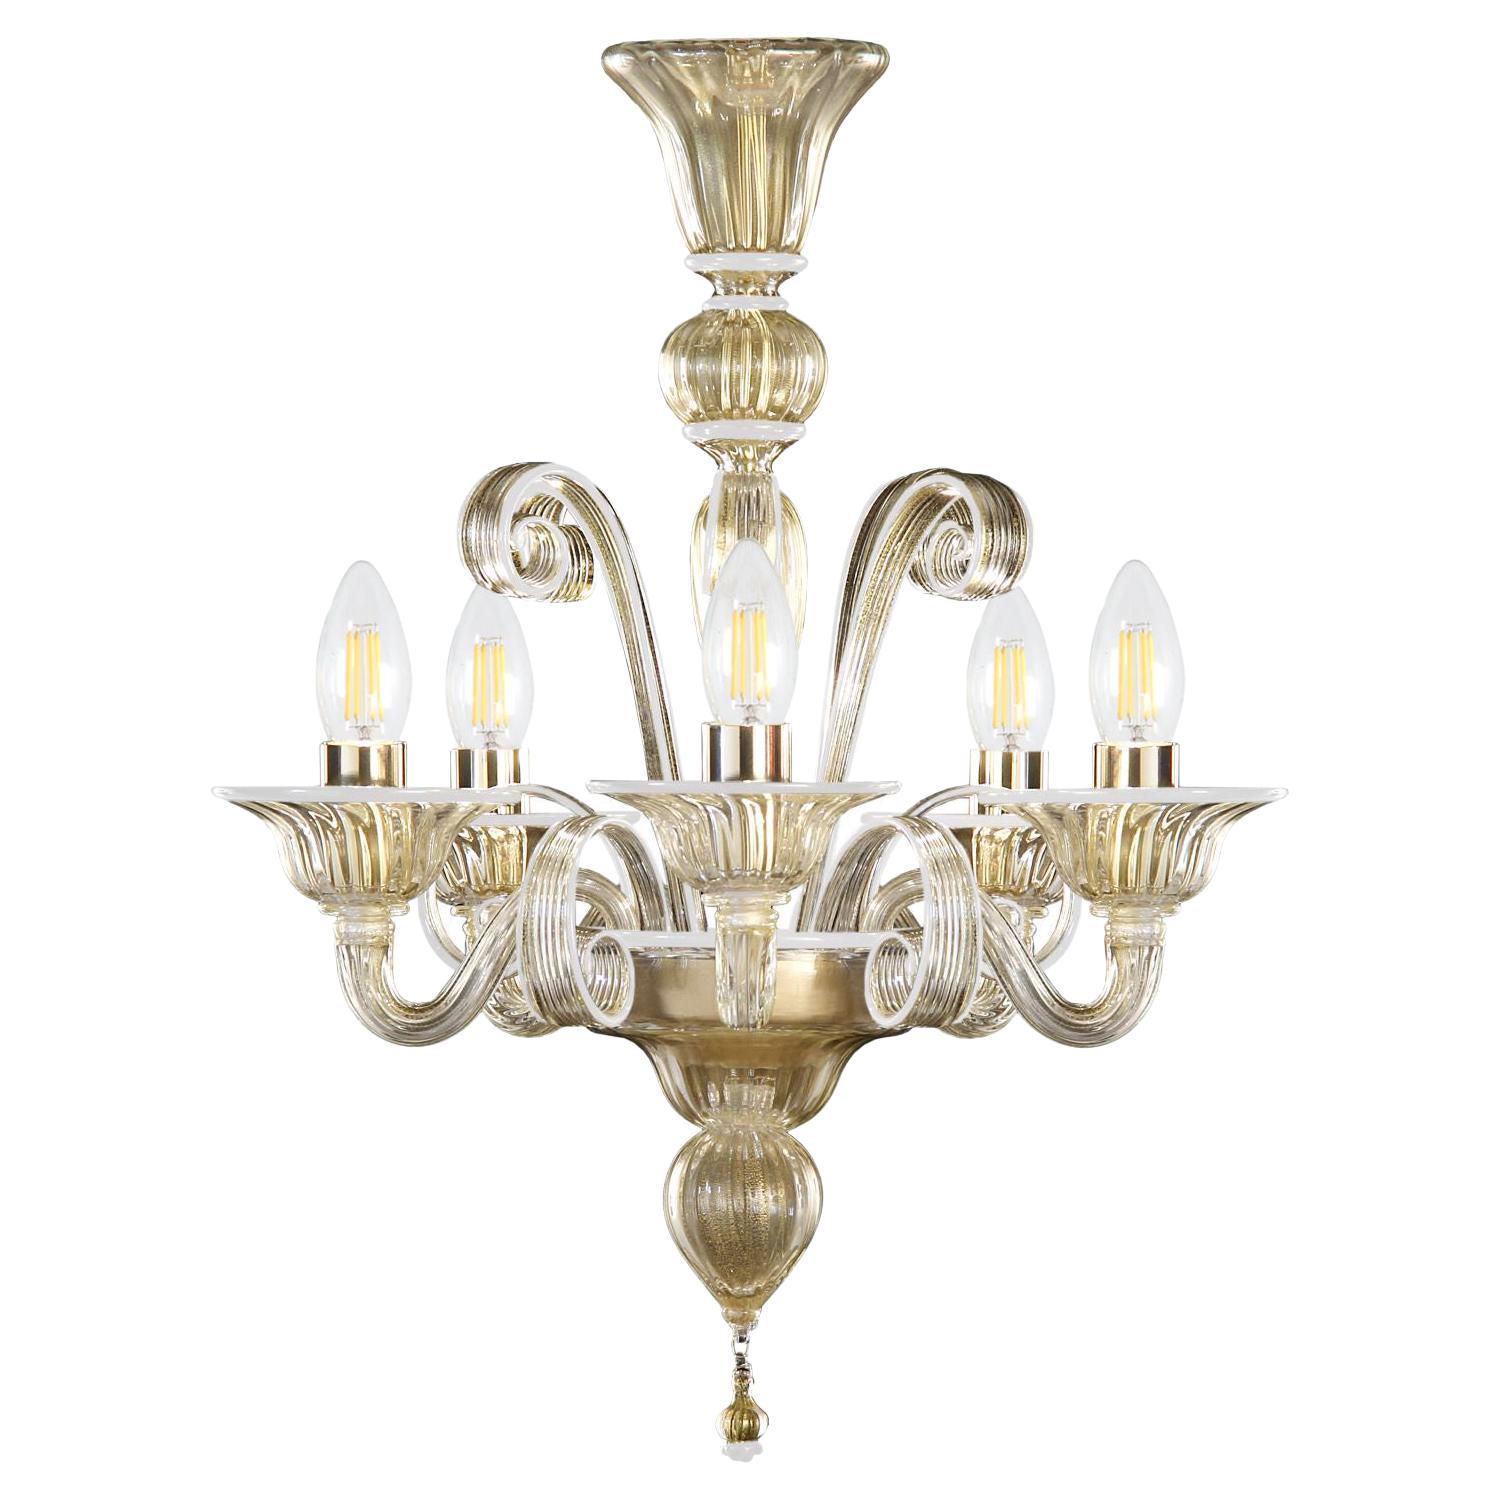 Chandelier 5 Arms Golden Leaf Artistic Murano Glass White Details by Multiforme For Sale